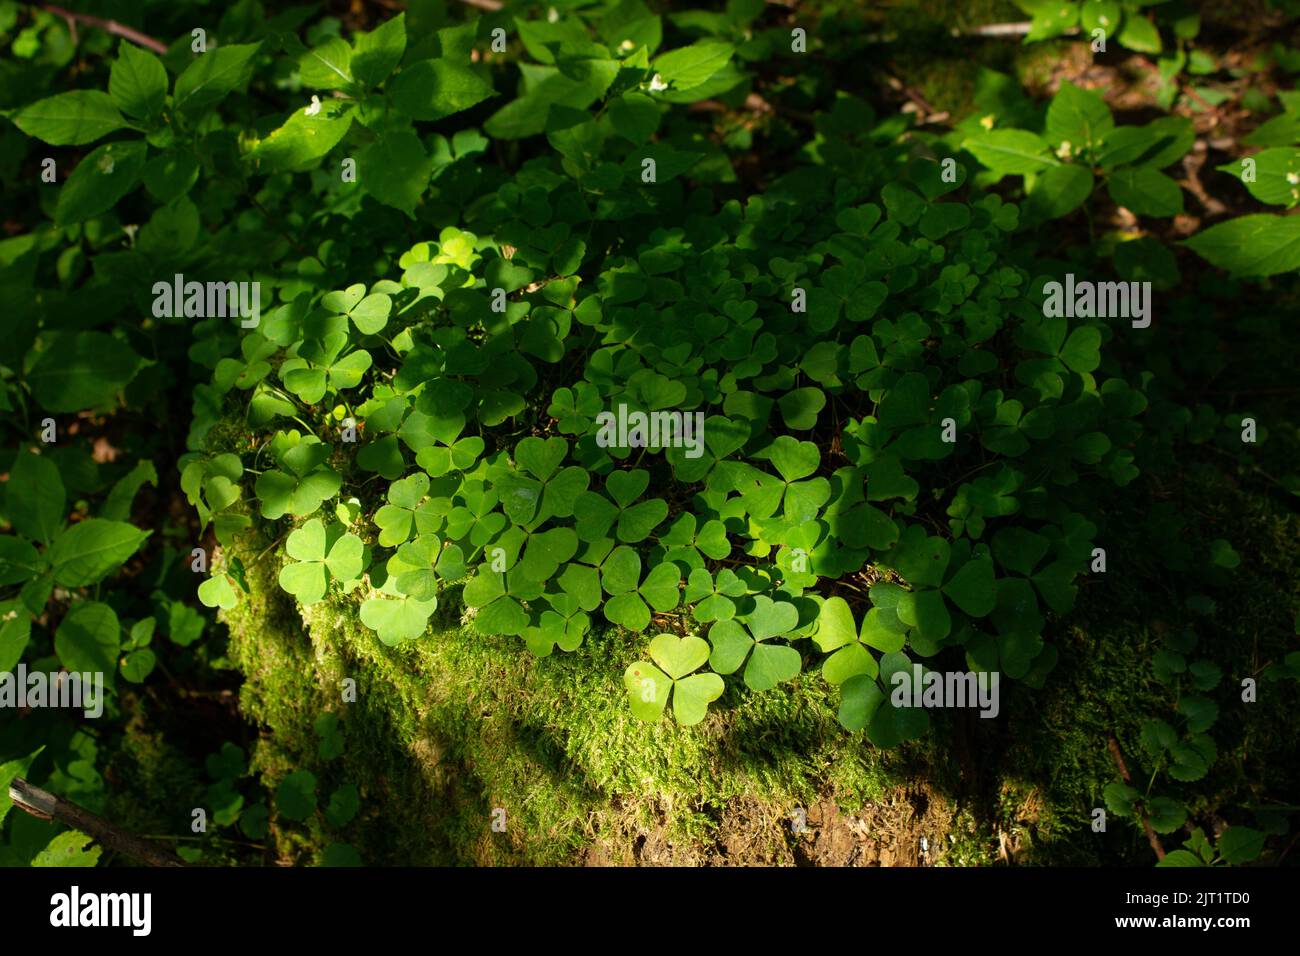 A closeup of green clover and moss growing on a tree, St Patrick's famous symbol Stock Photo